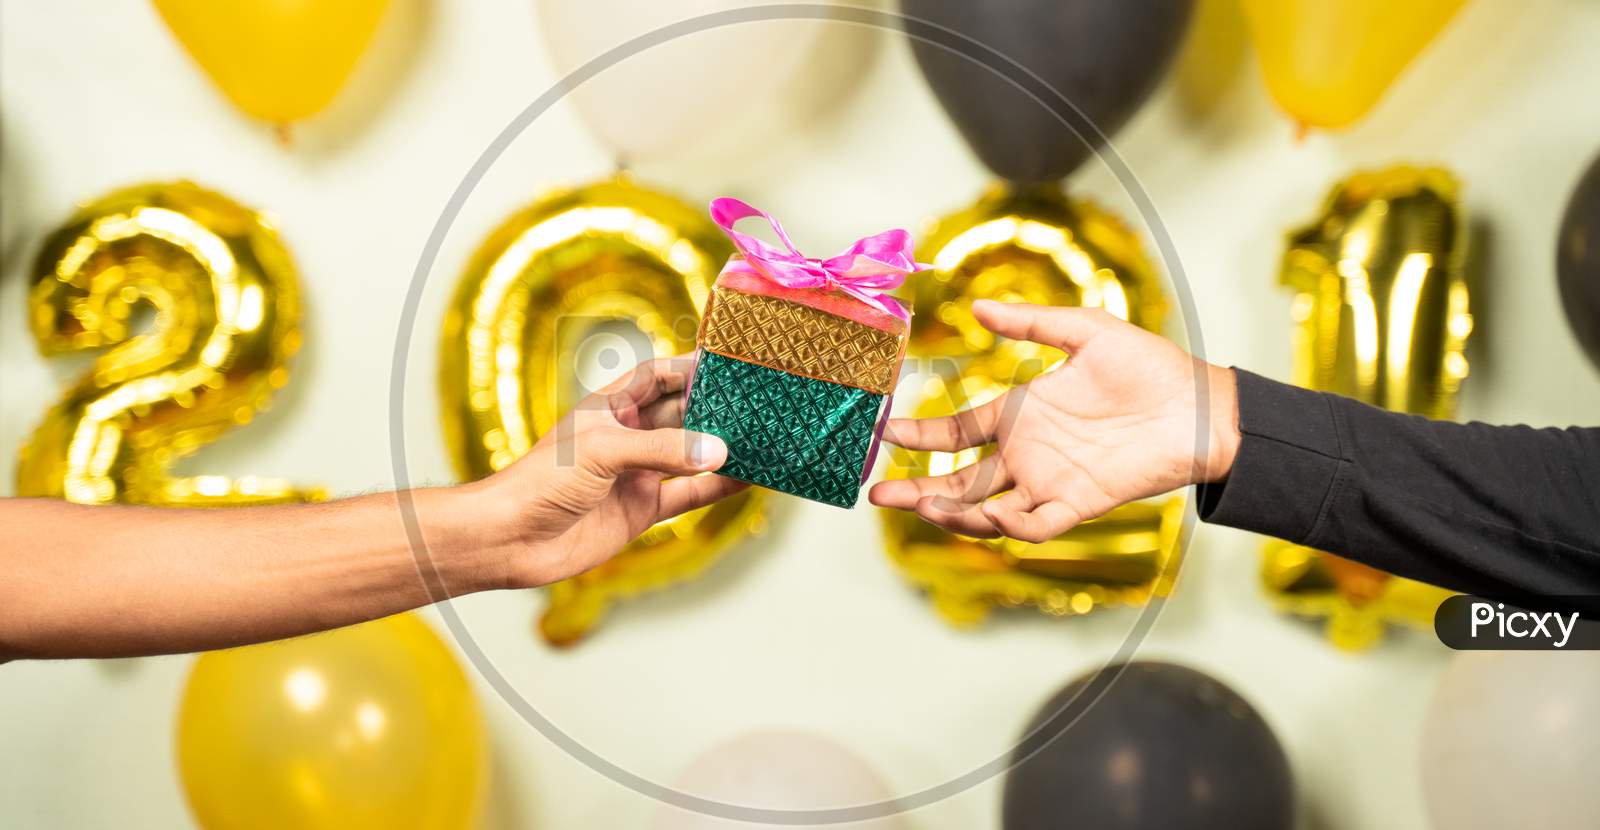 Close Up Of Hands Giving Present Gift Box In 2021 New Year Celebration On Decorated Background - Concept Of Gift Sharing On New Year Holydays.